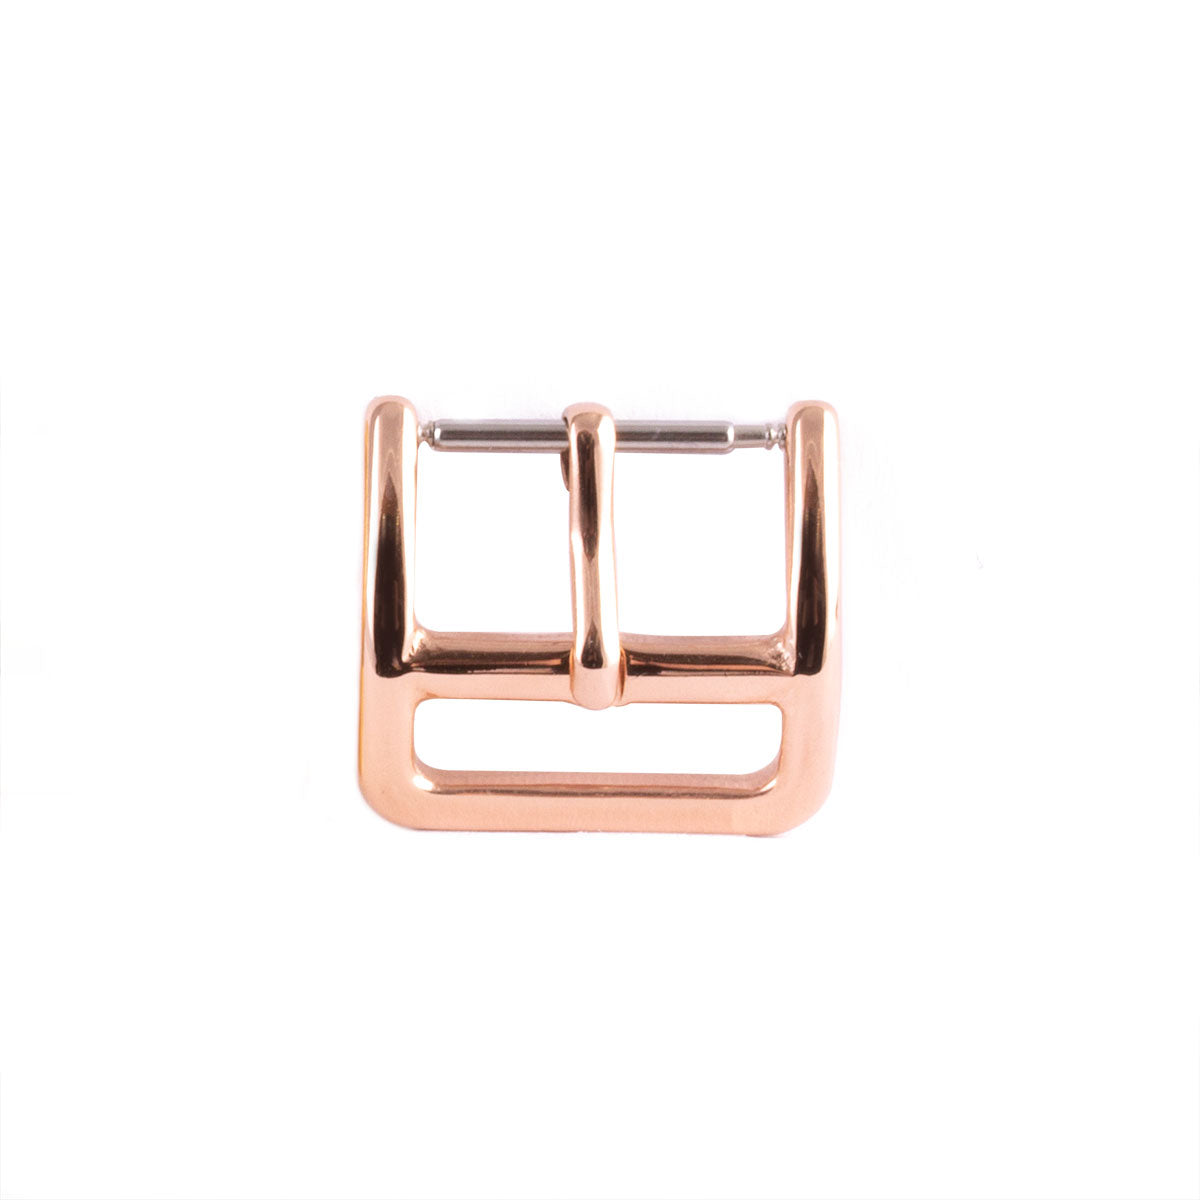 ​ABP tang buckle compatible with Hermès watches - 12mm, 14mm, 16mm, 18mm, 20mm